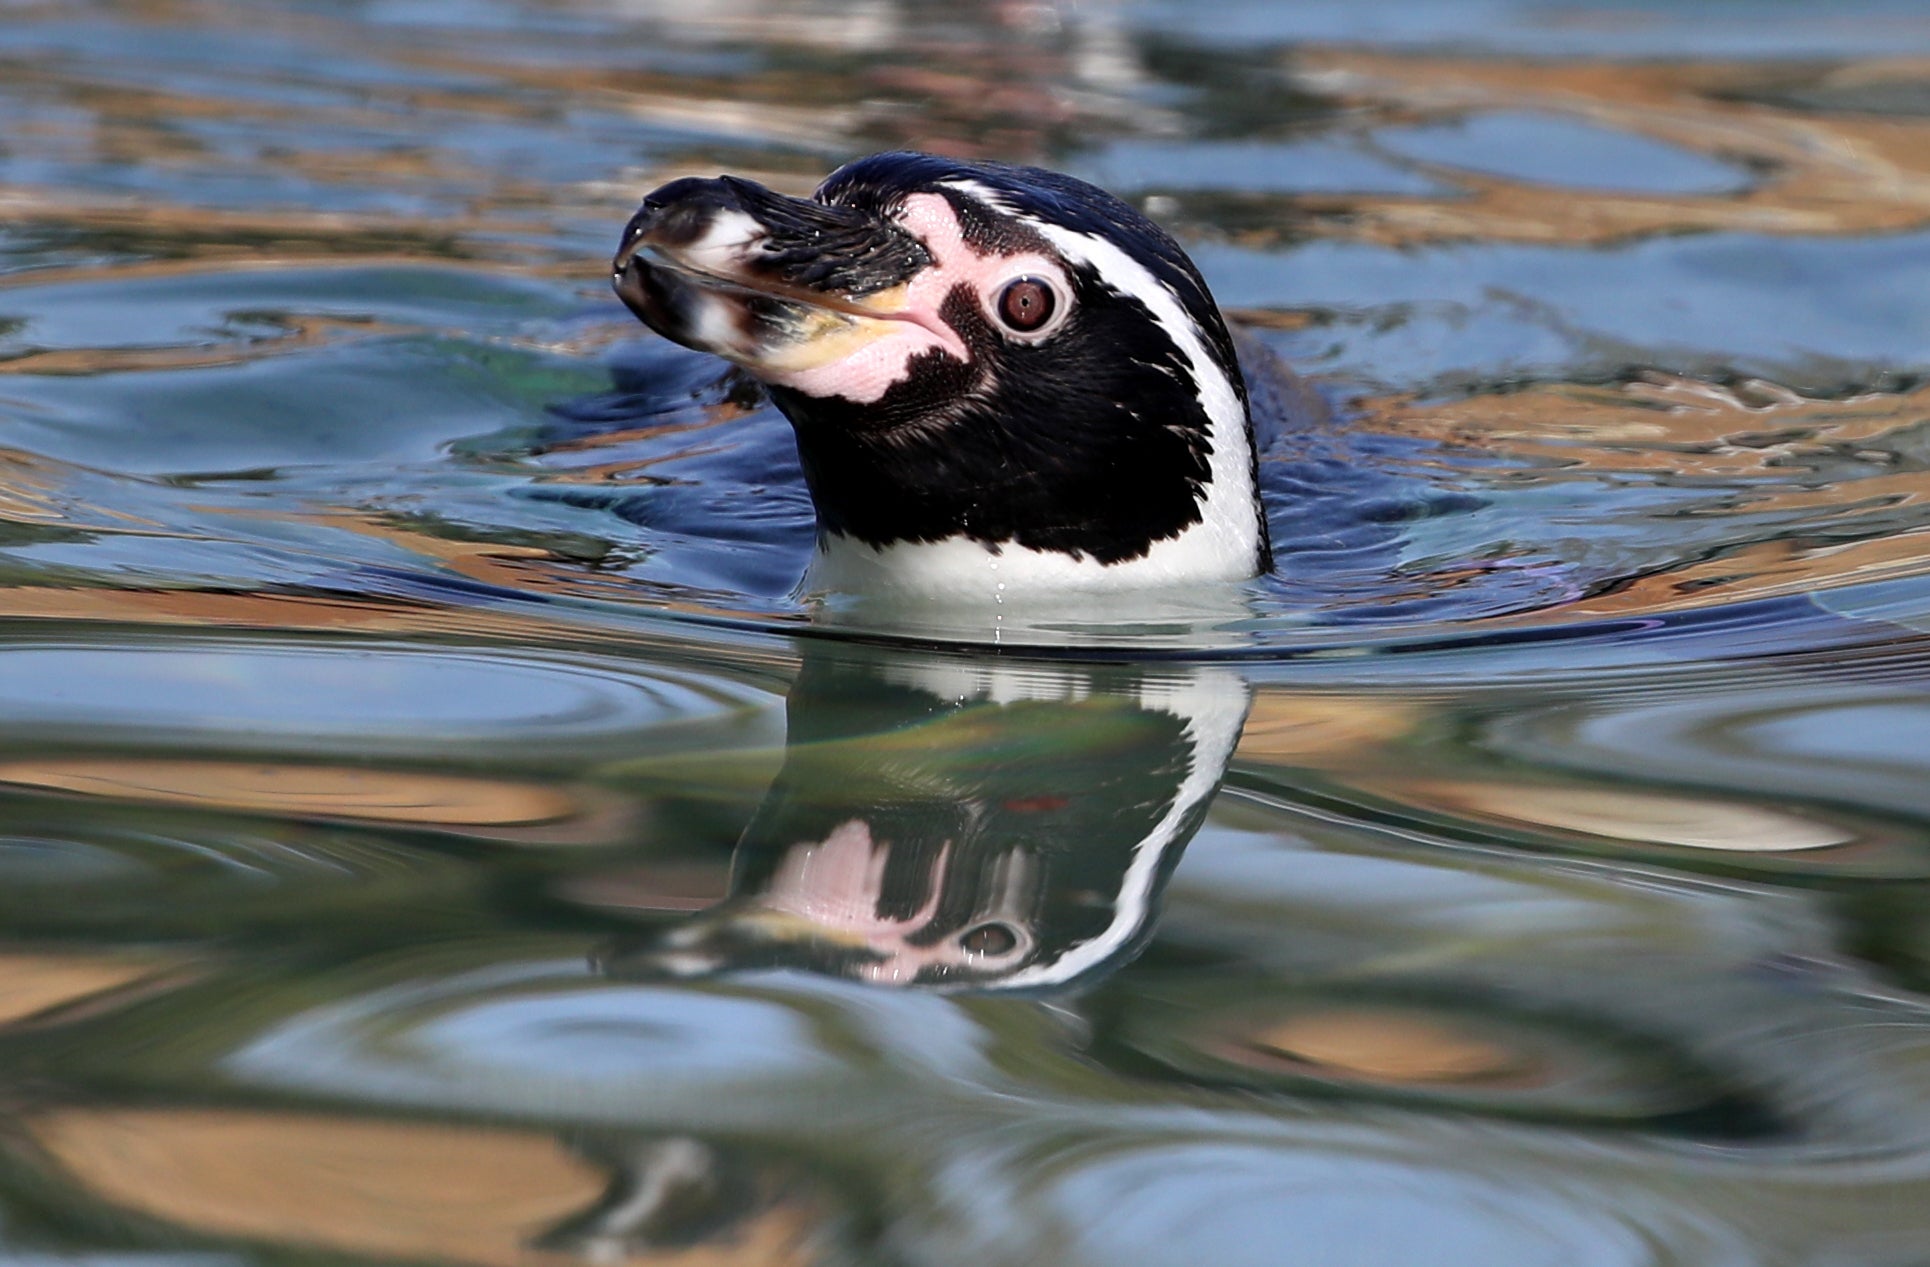 A Humboldt penguin swims in its pond (Andrew Milligan/PA)